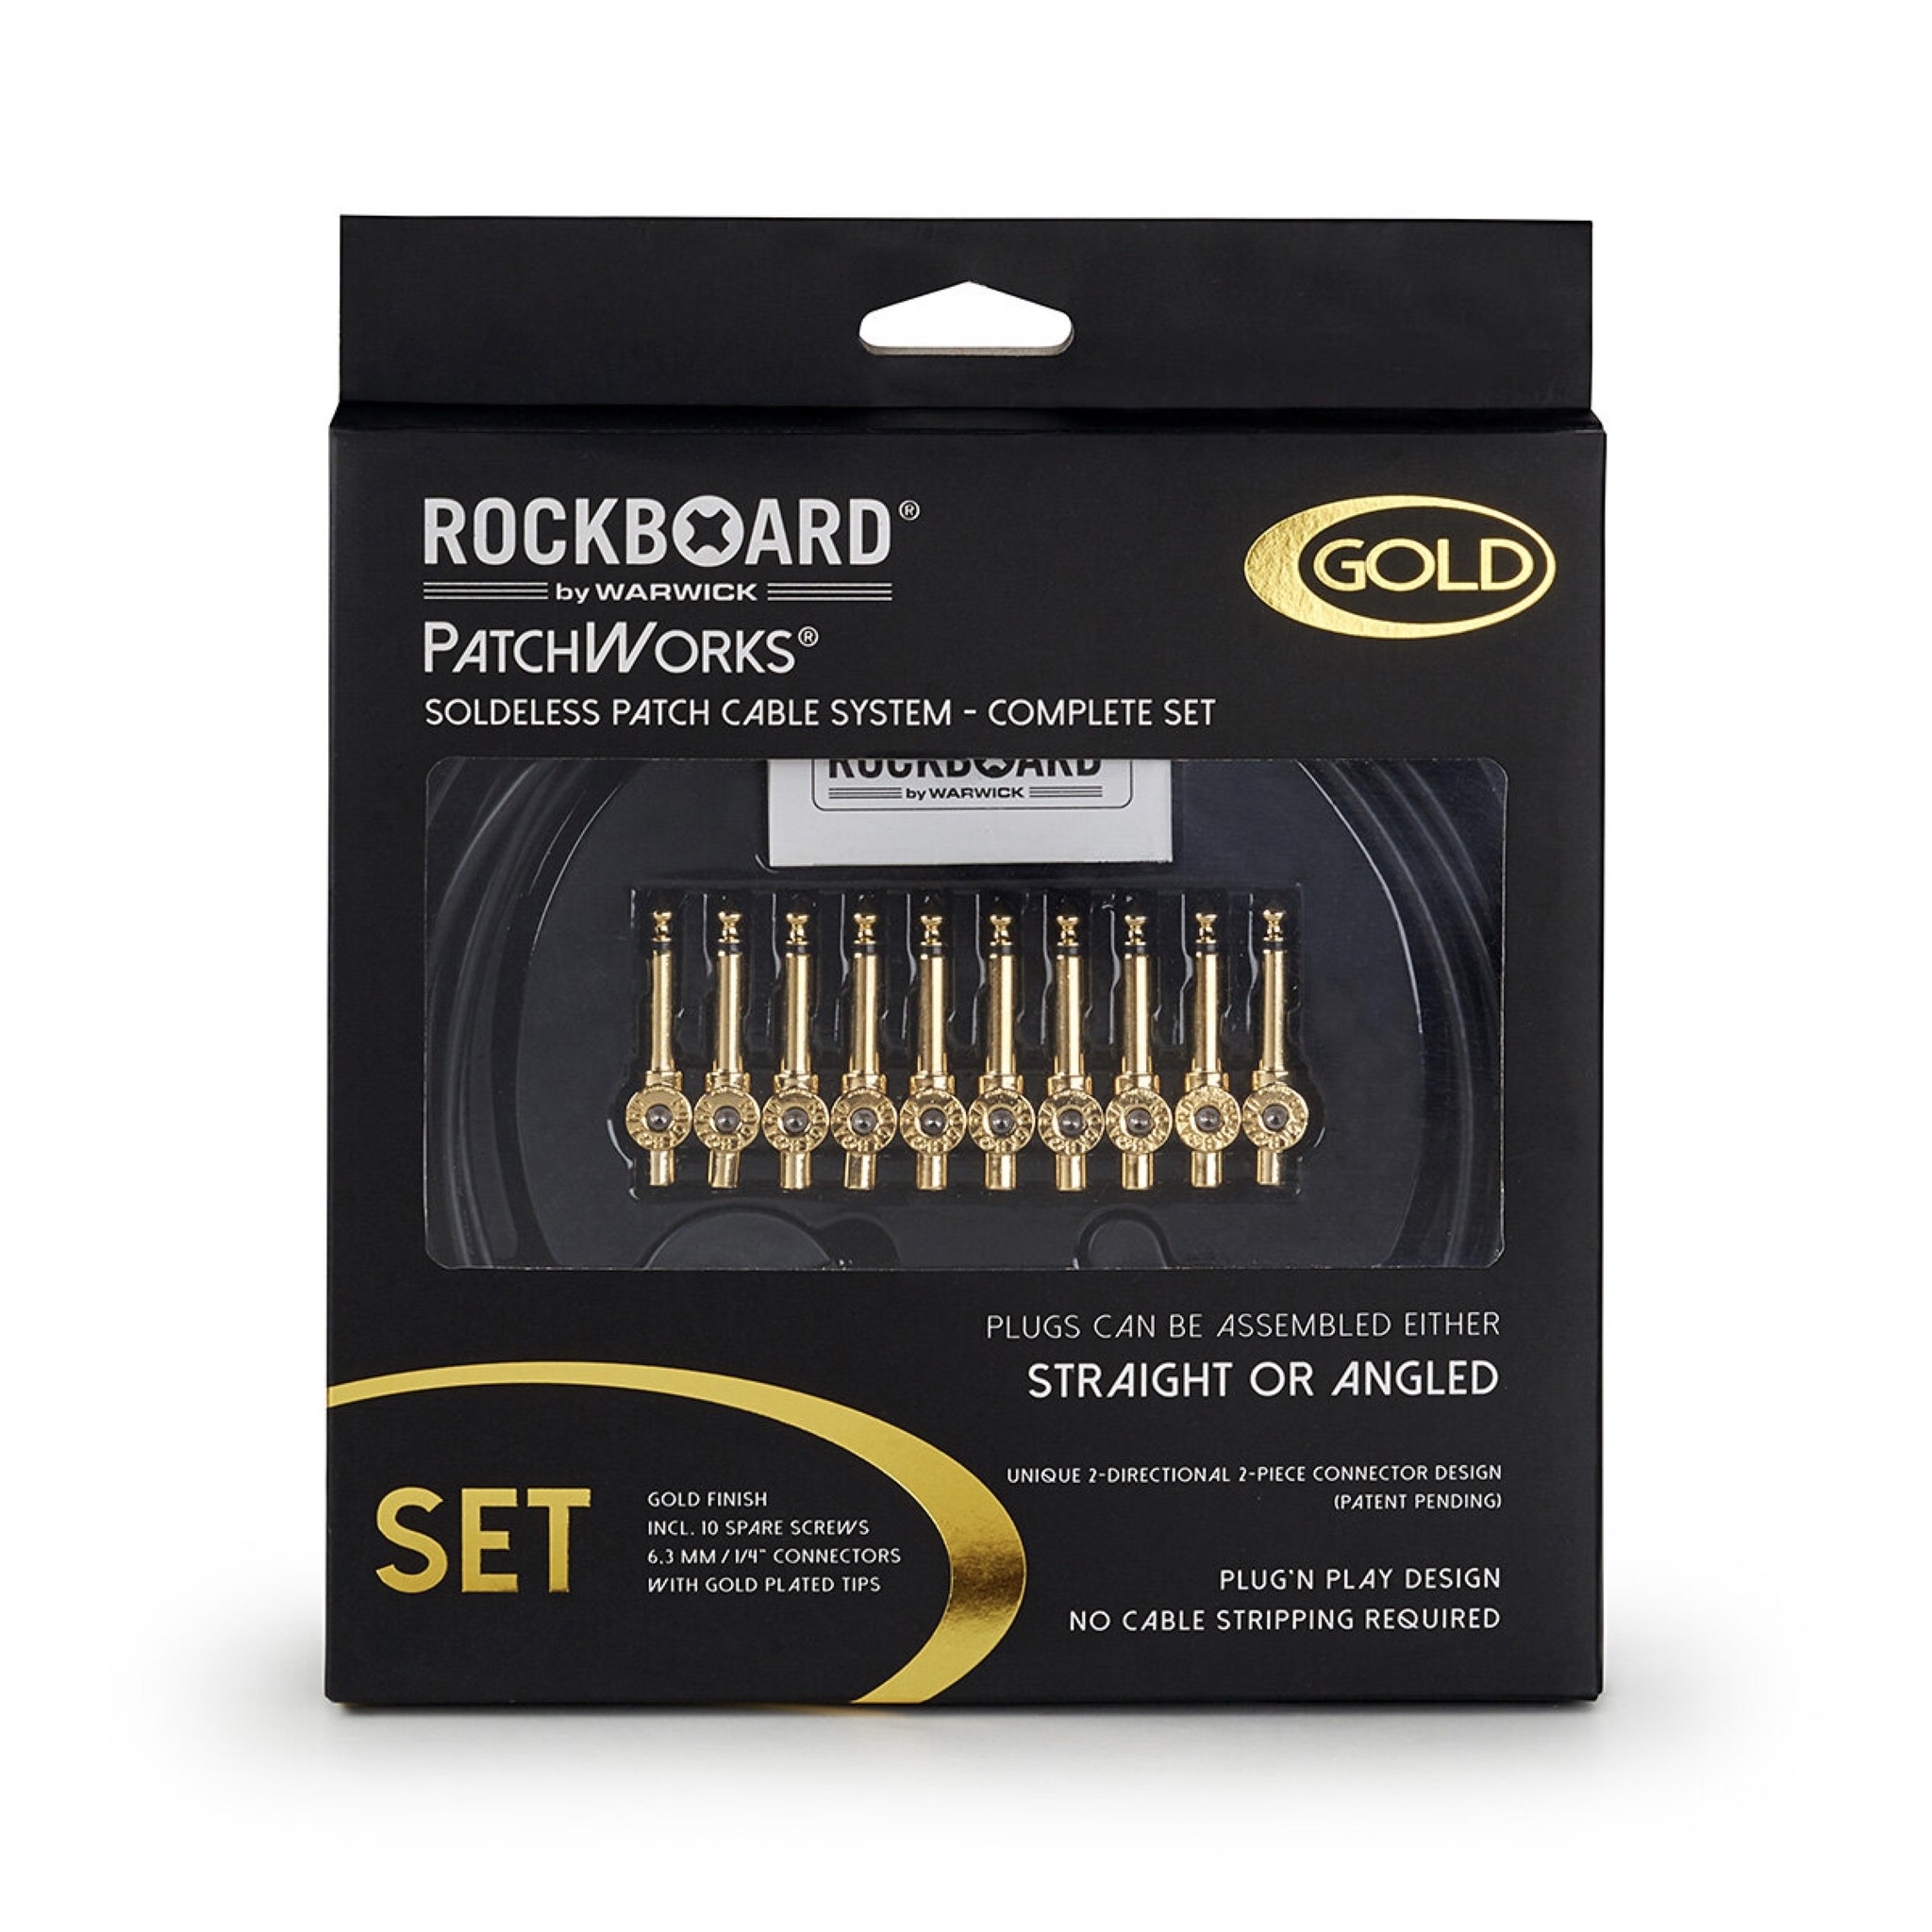 RockBoard PatchWorks Solderless Patch Cable Set - 3 m / 9.8 ft. Cable   10 Plugs - Gold